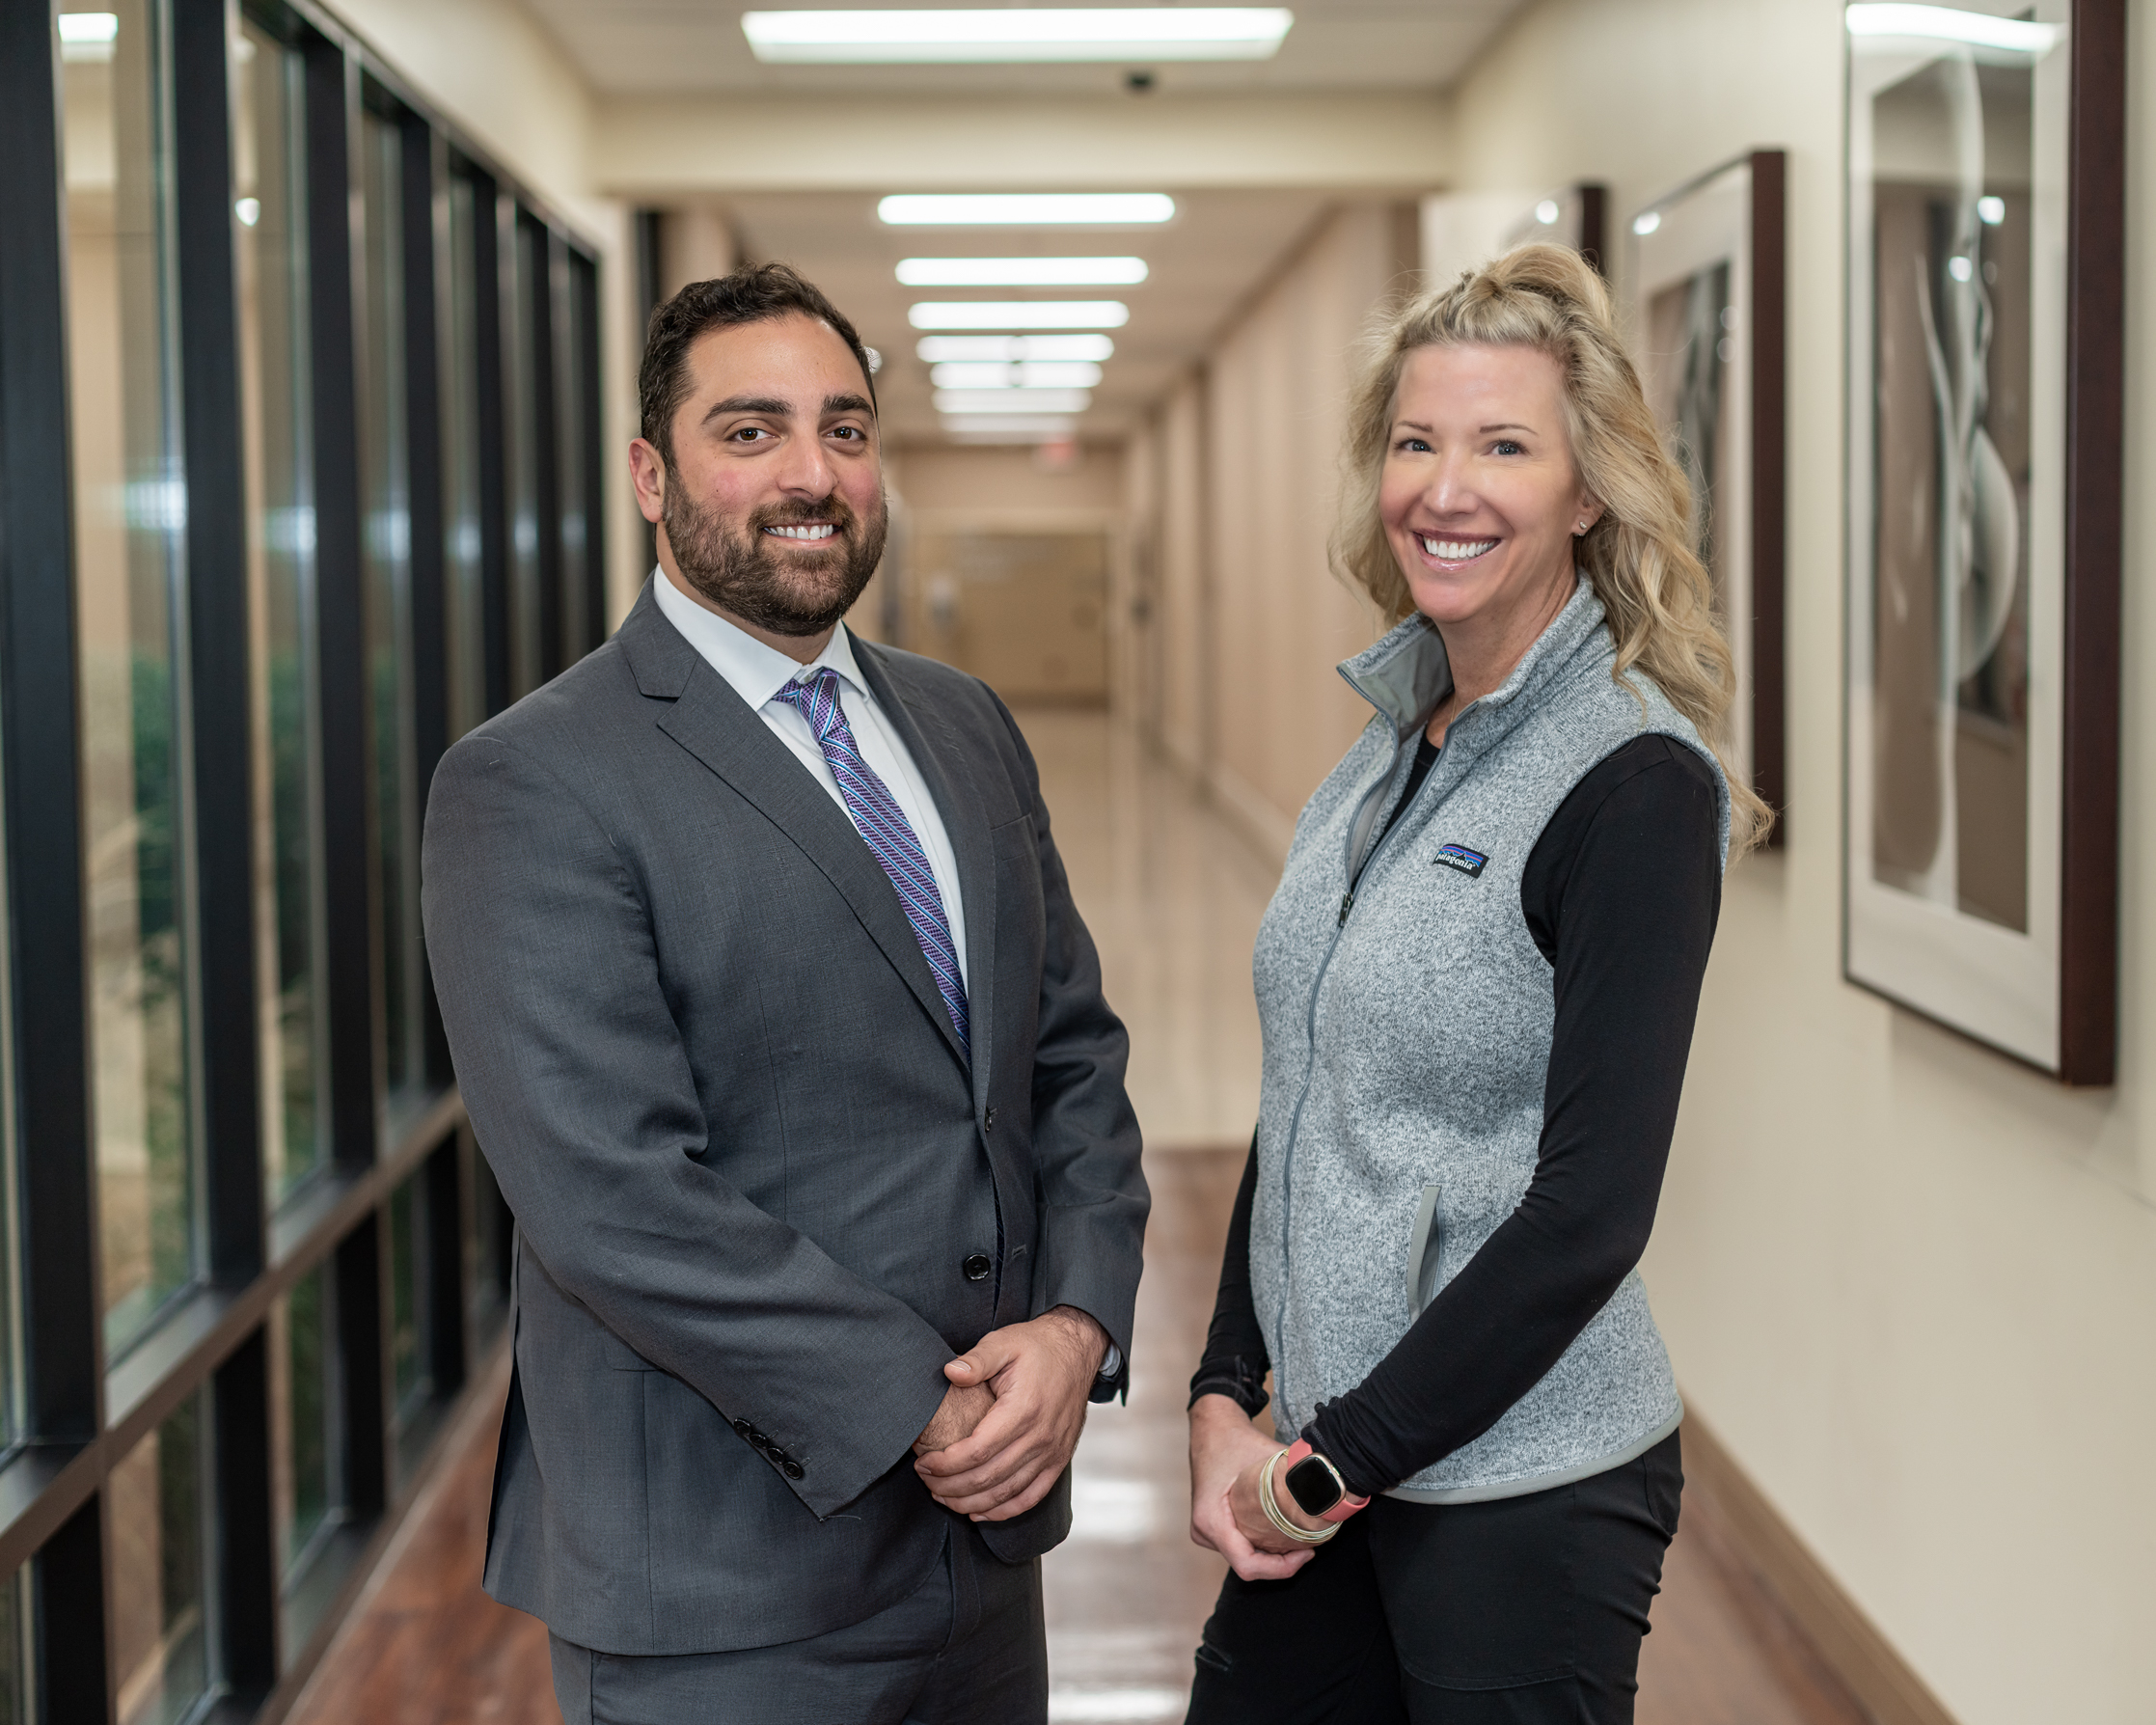 Dr. Jameil Abou-Hanna, general and bariatric surgery, and Regina Dunn, bariatrics coordinator, smile in the hallway of TriStar Hendersonville Medical Center.